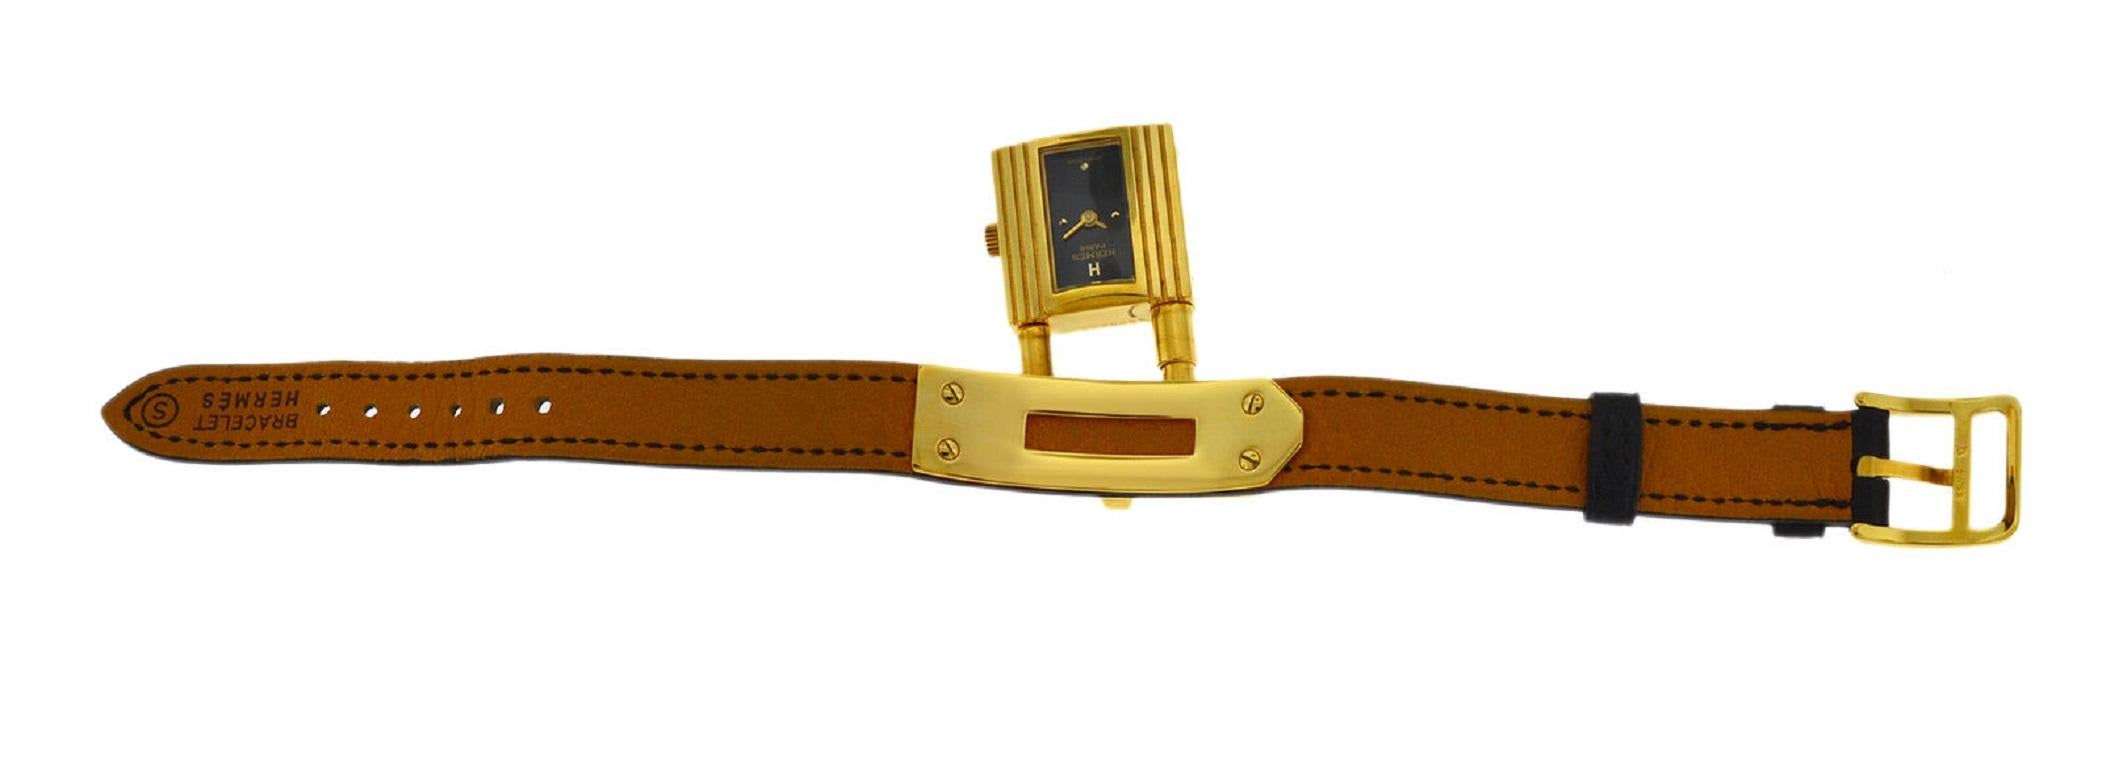 Ladies Hermes Kelly KE1.201 Gold Black Leather Belt Quartz Watch In Excellent Condition For Sale In New York, NY